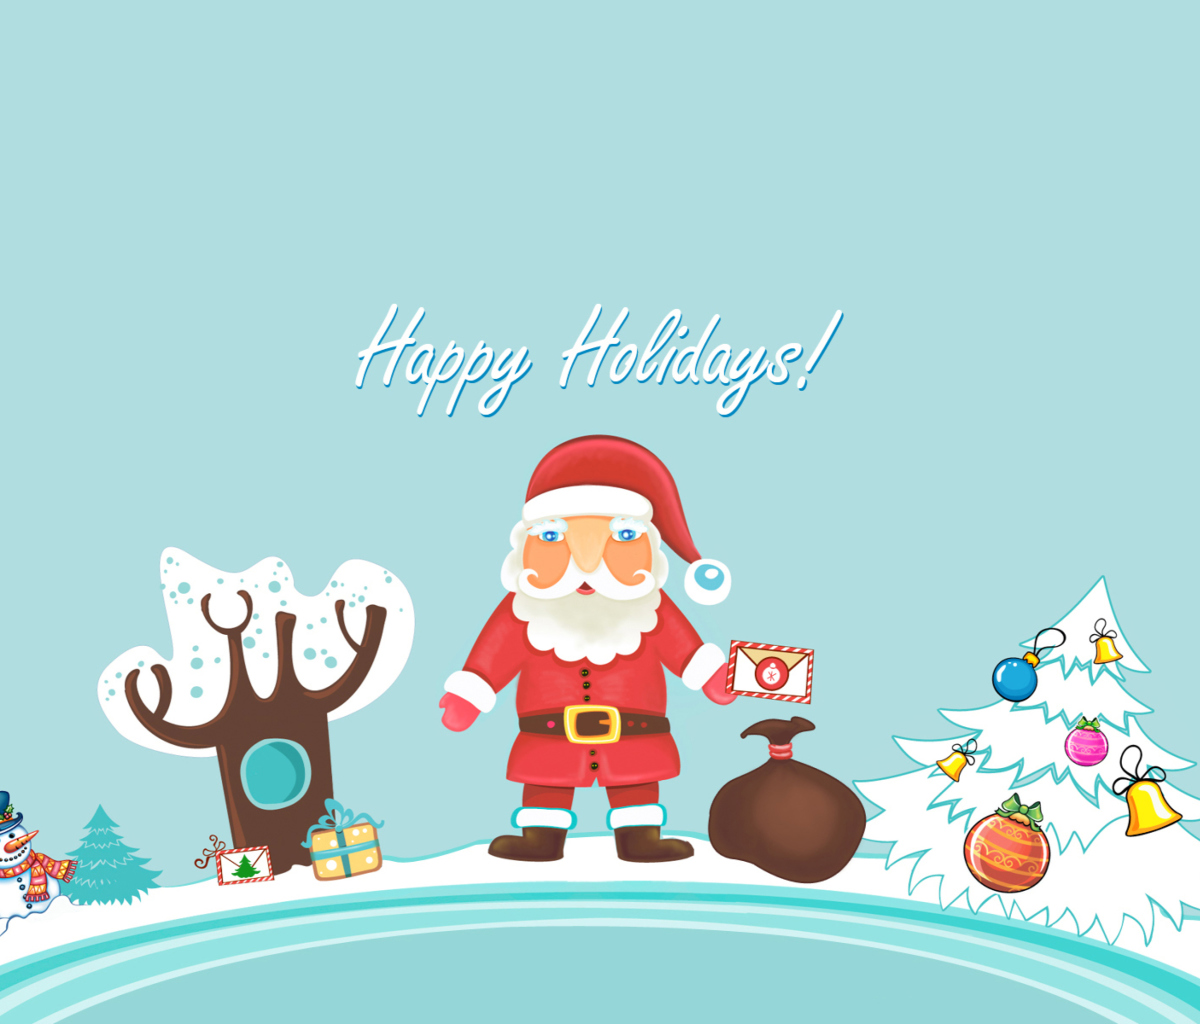 Santa Claus Wishes You Happy Holidays wallpaper 1200x1024